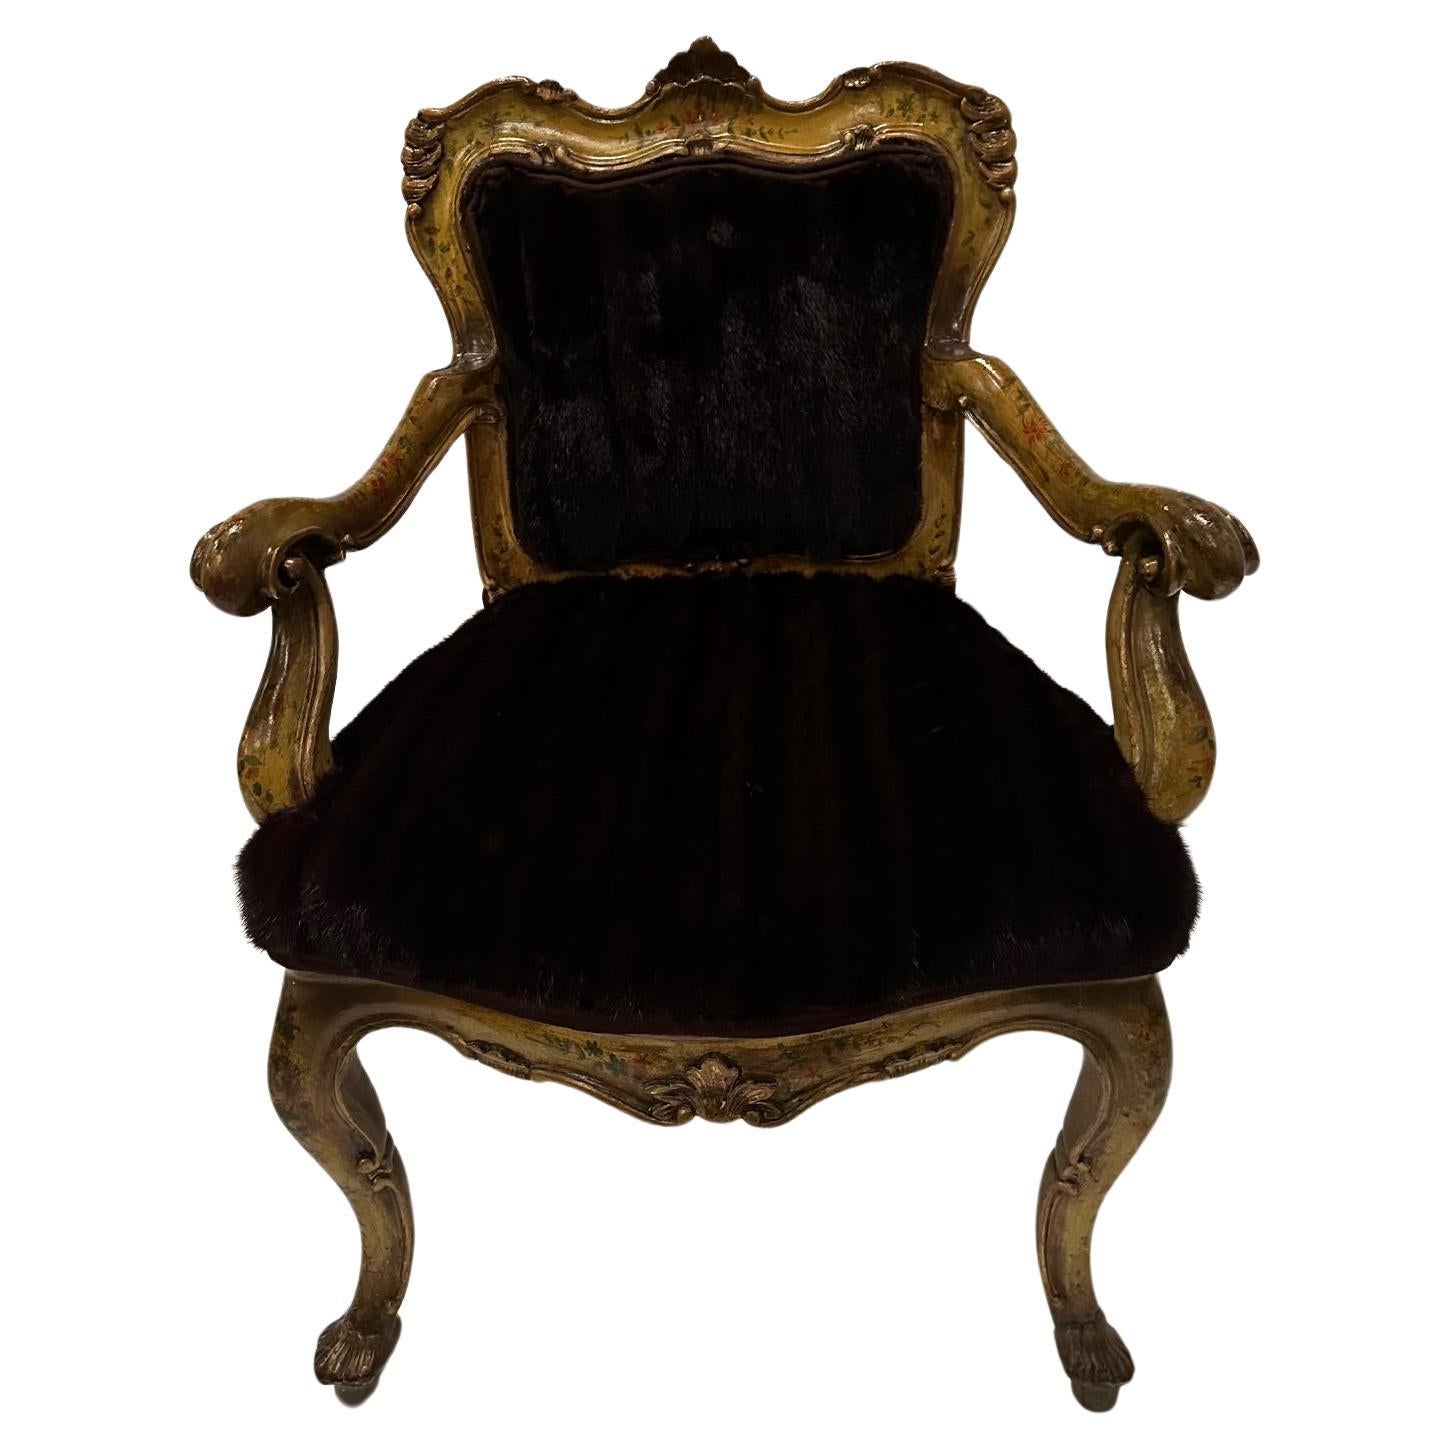 Sinfully Rich Ornate Italian Painted Venetian Armchair Upholstered in Mink Fur